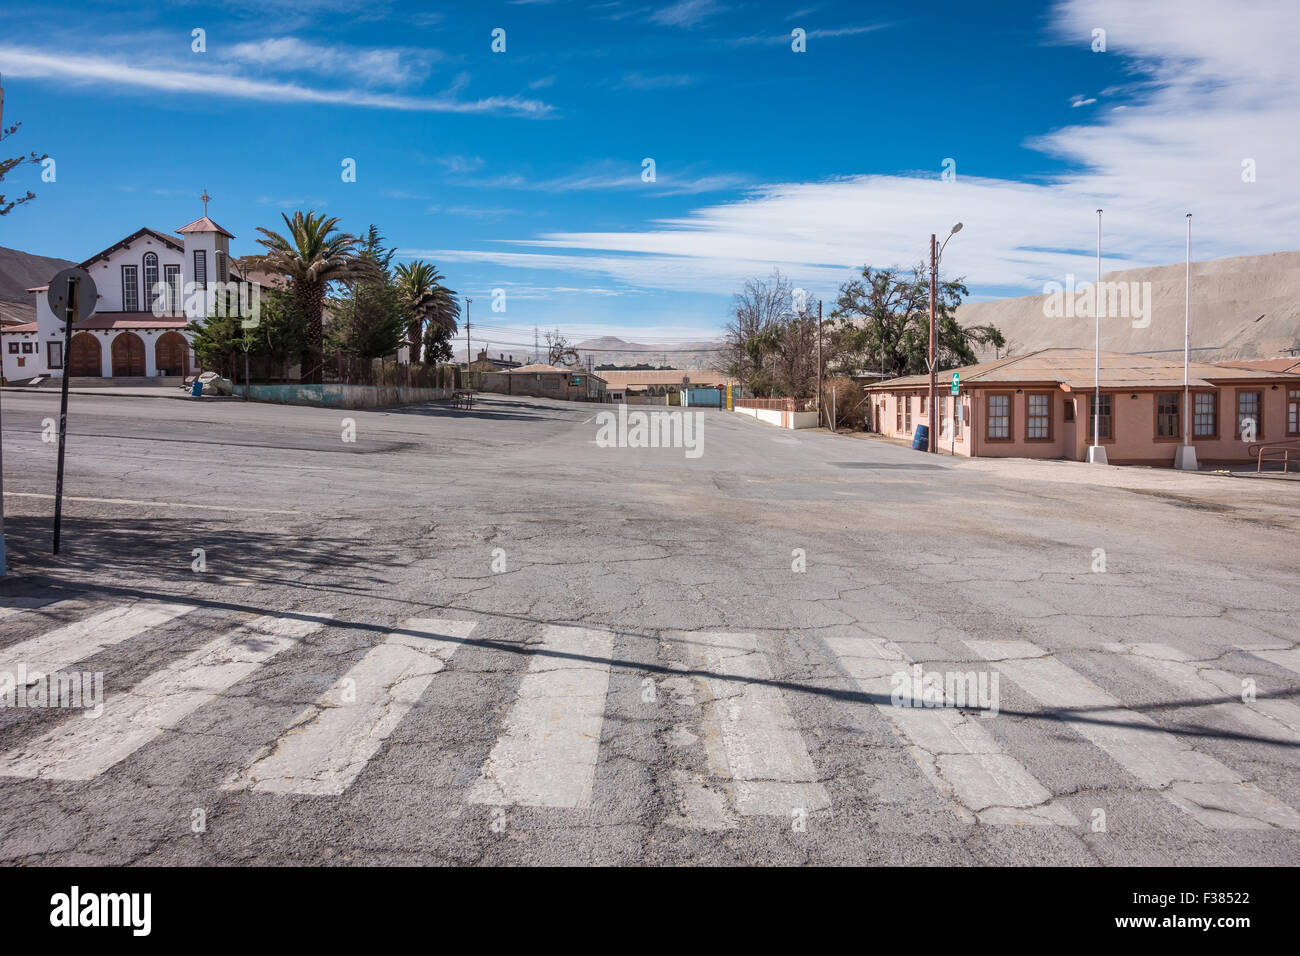 Empty streets in the former mining town of Chuquicamata, which has been abandoned since 2007. Stock Photo